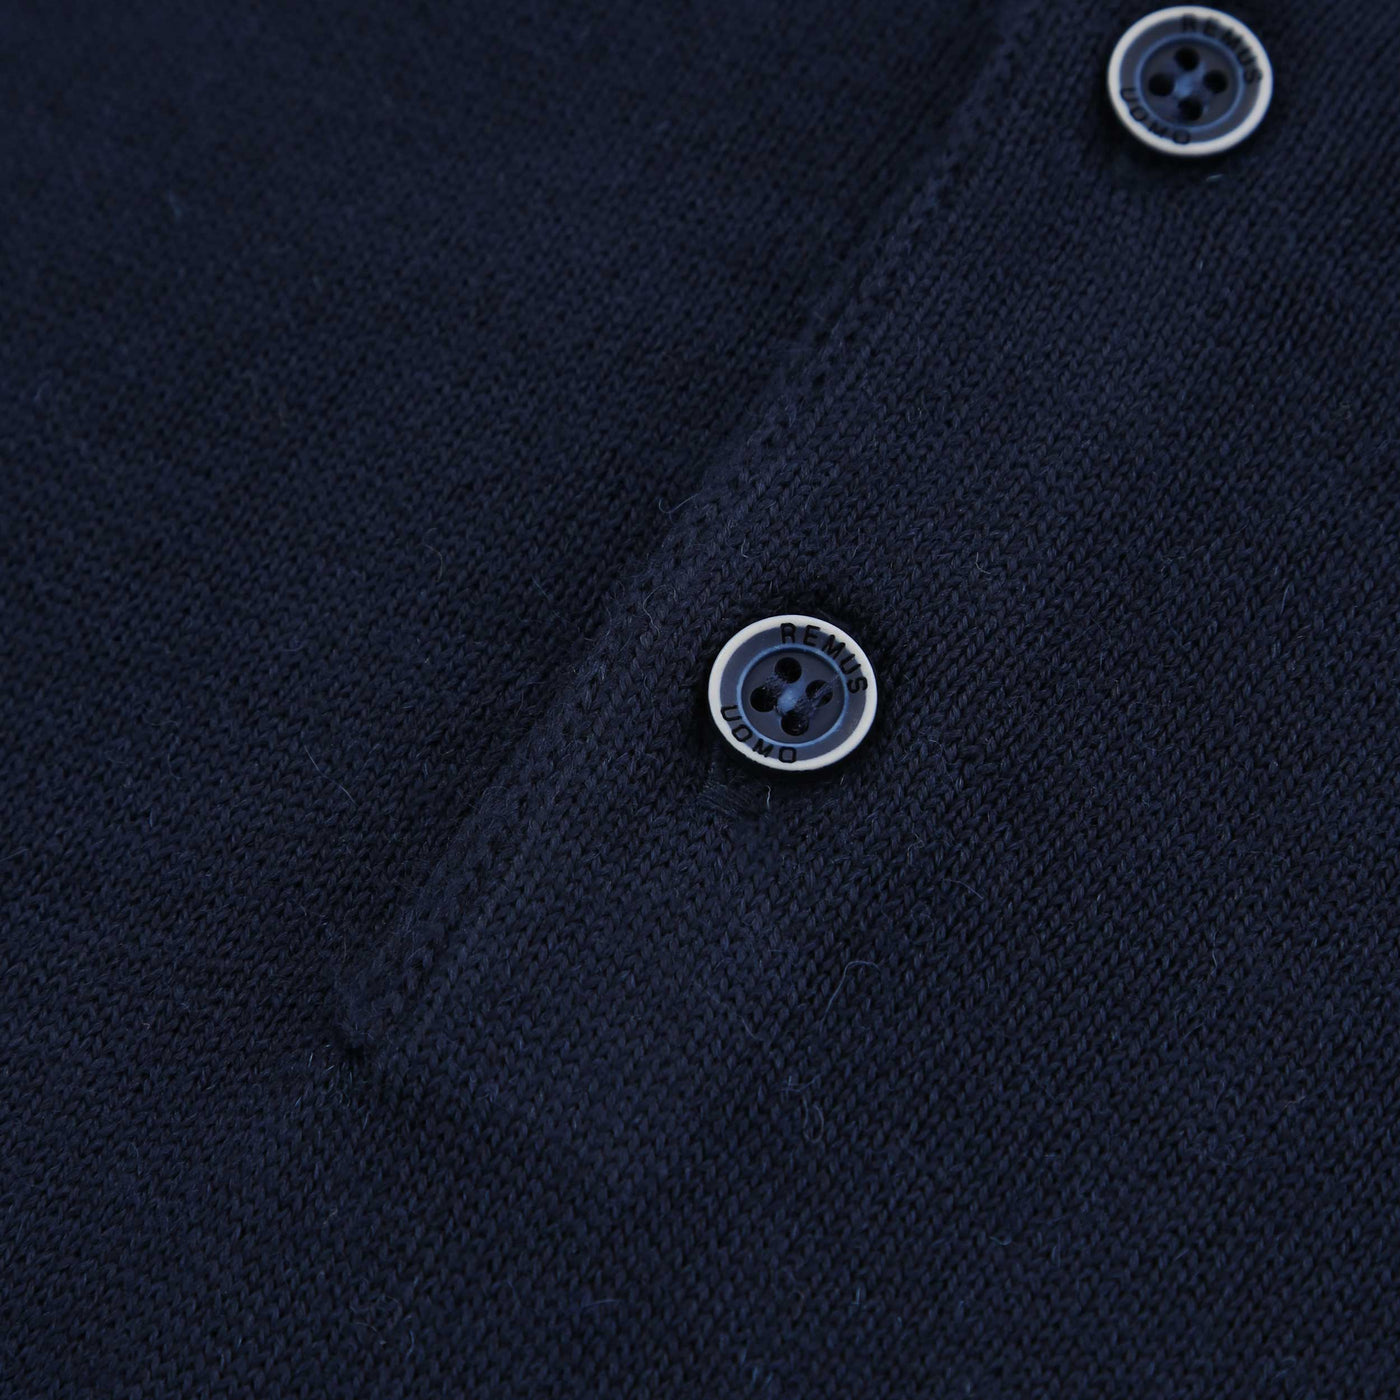 Remus Uomo 3 Button Knitted Polo Shirt in Navy Button